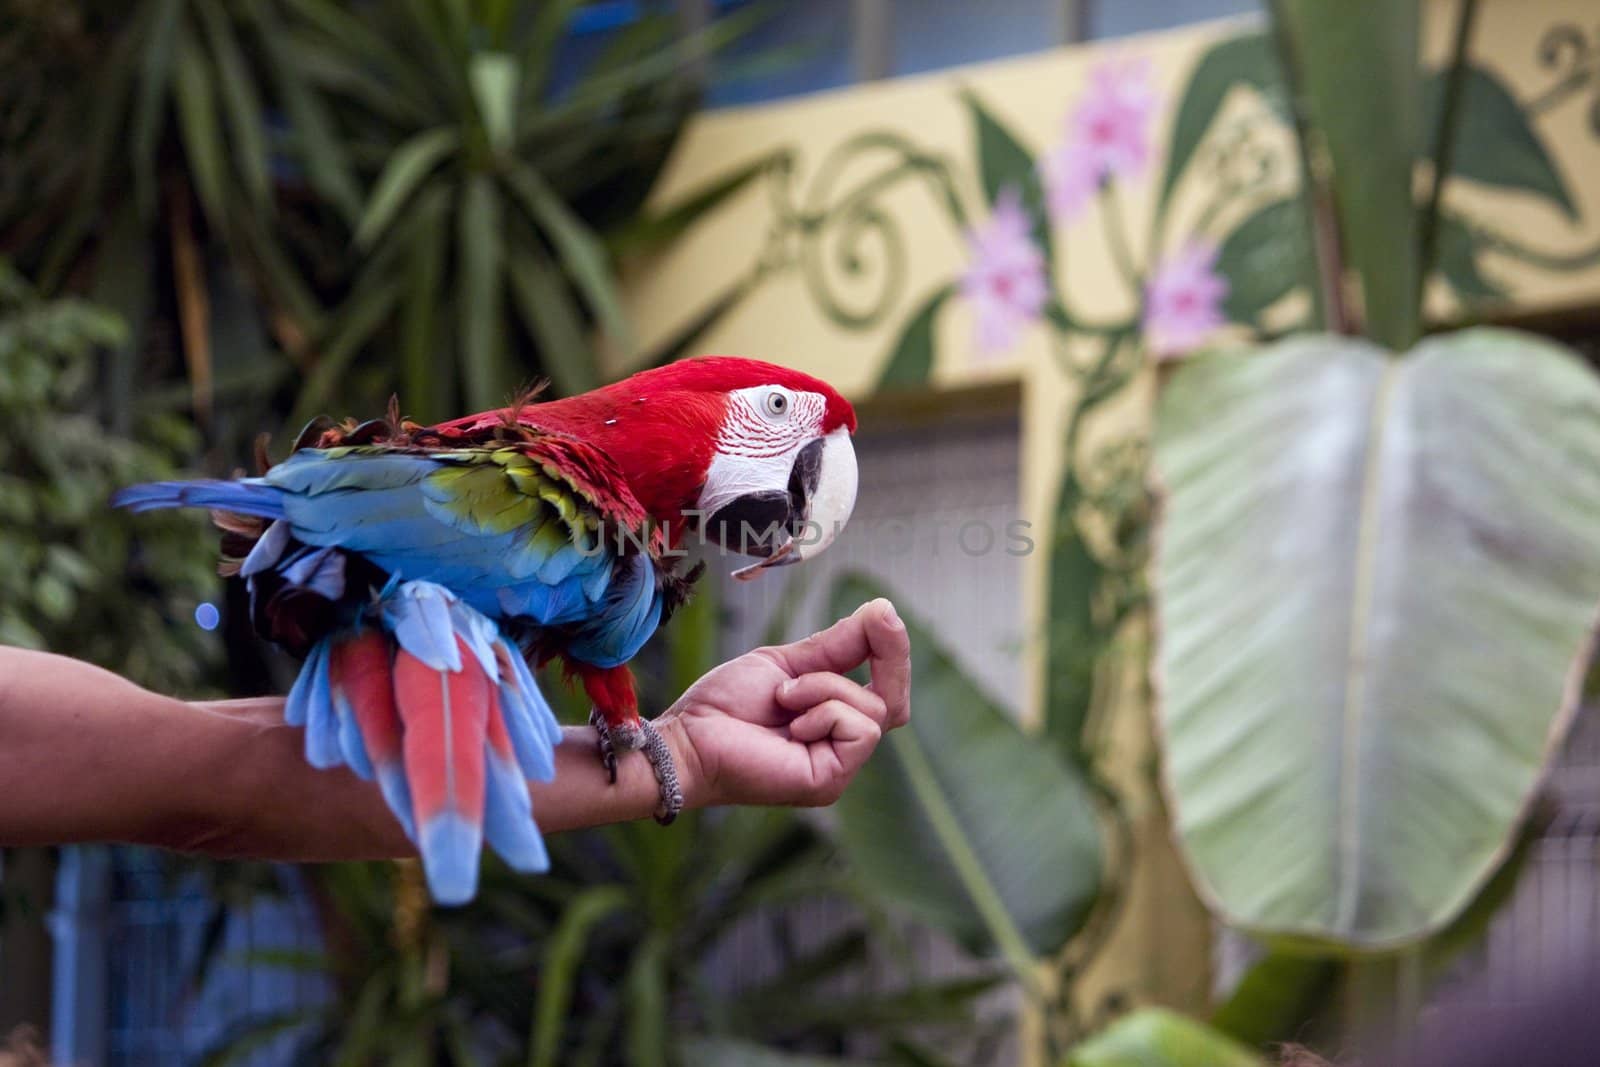 View of a scarlet macaw in a performance show on top of the trainer's arm.